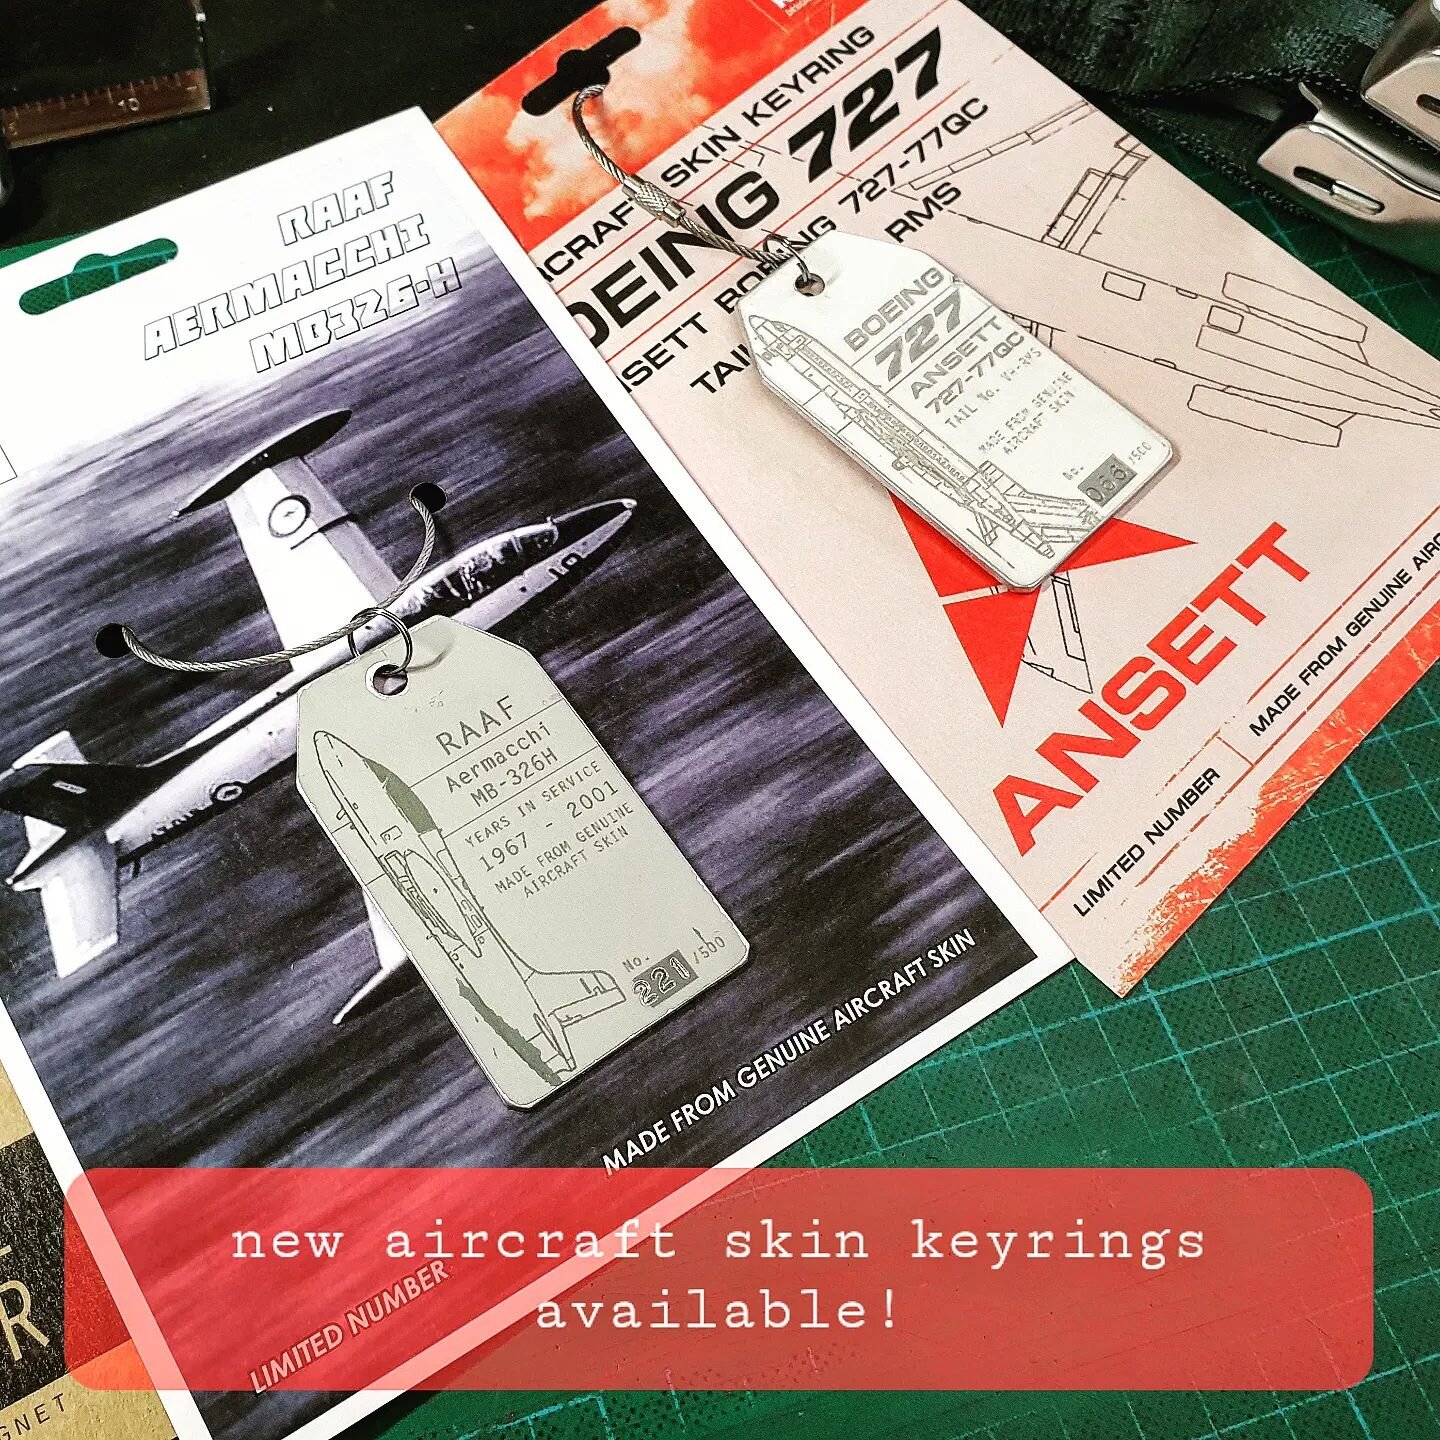 #aircraft skin #keyrings now available from #relicdesignandcraftco etsy store. Ansett 727 and RAAF Aermacchi.

https://www.etsy.com/shop/RelicDesignAndCraft

#aviation #aviationlovers #airline #airshow #keychain #keyring #brisbanedesign #brisbaneart 